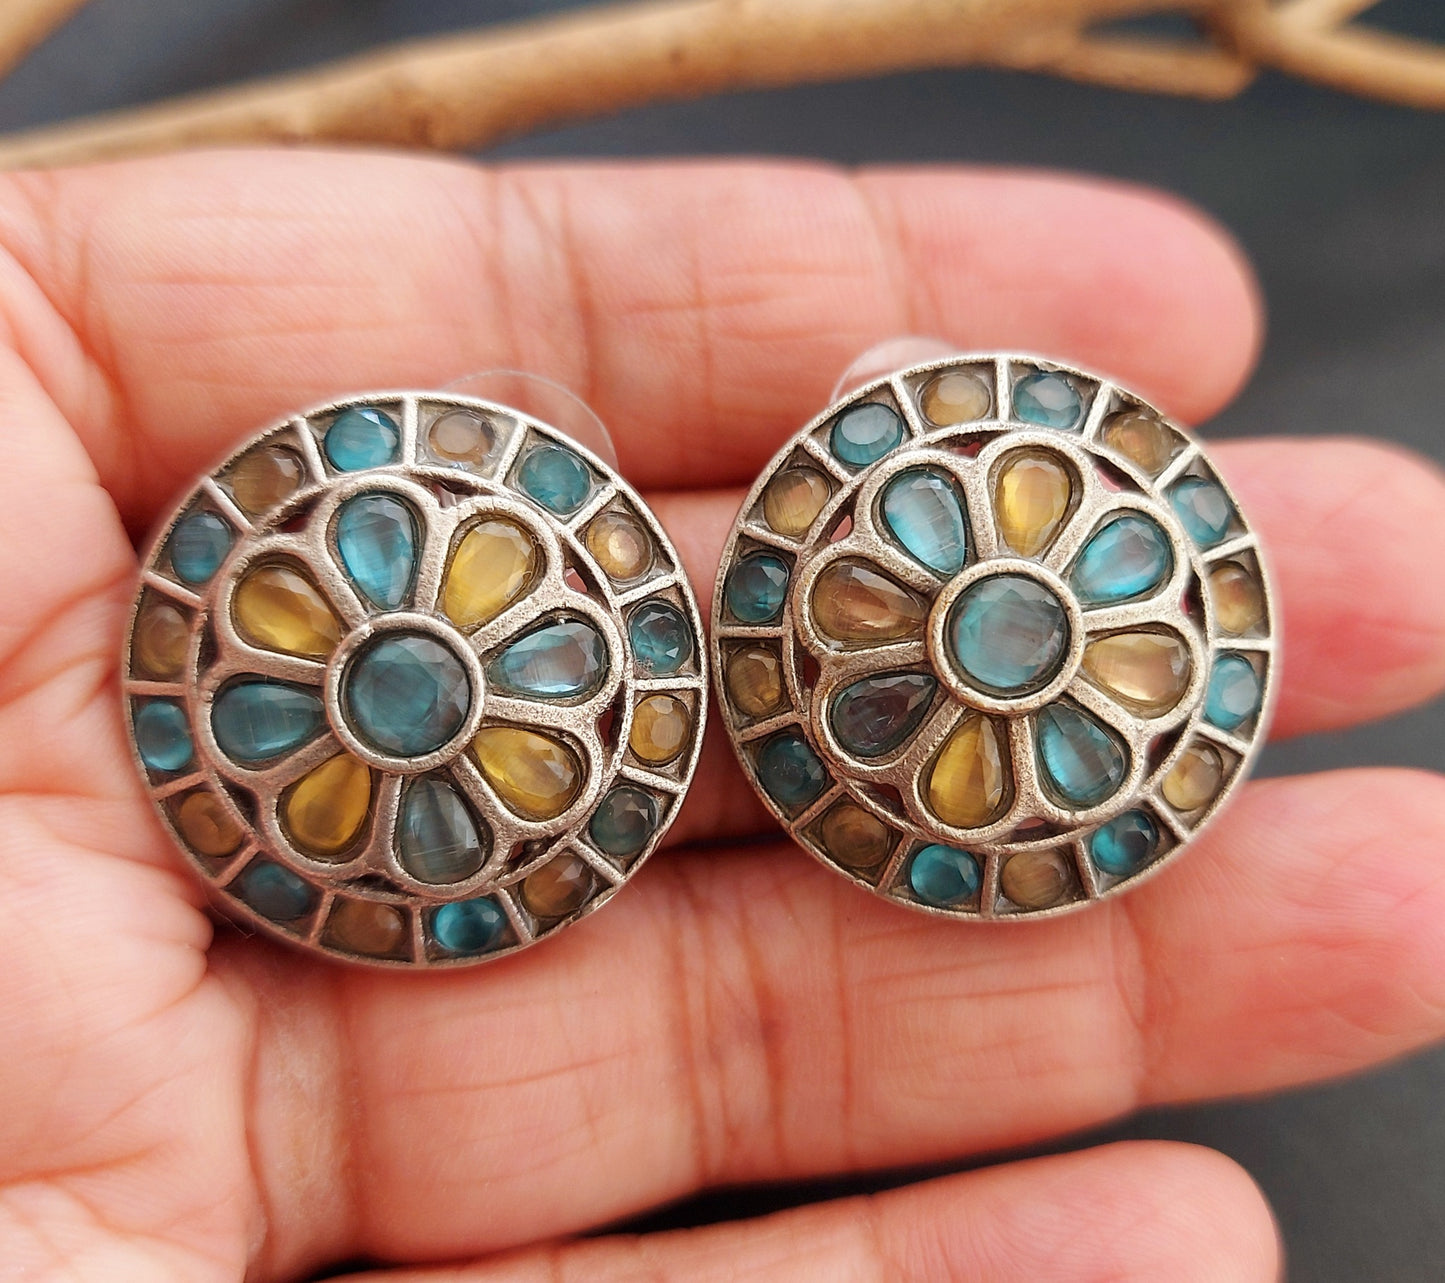 Stone Studded Silver Look alike Round Studs - Light Blue and Light Yellow